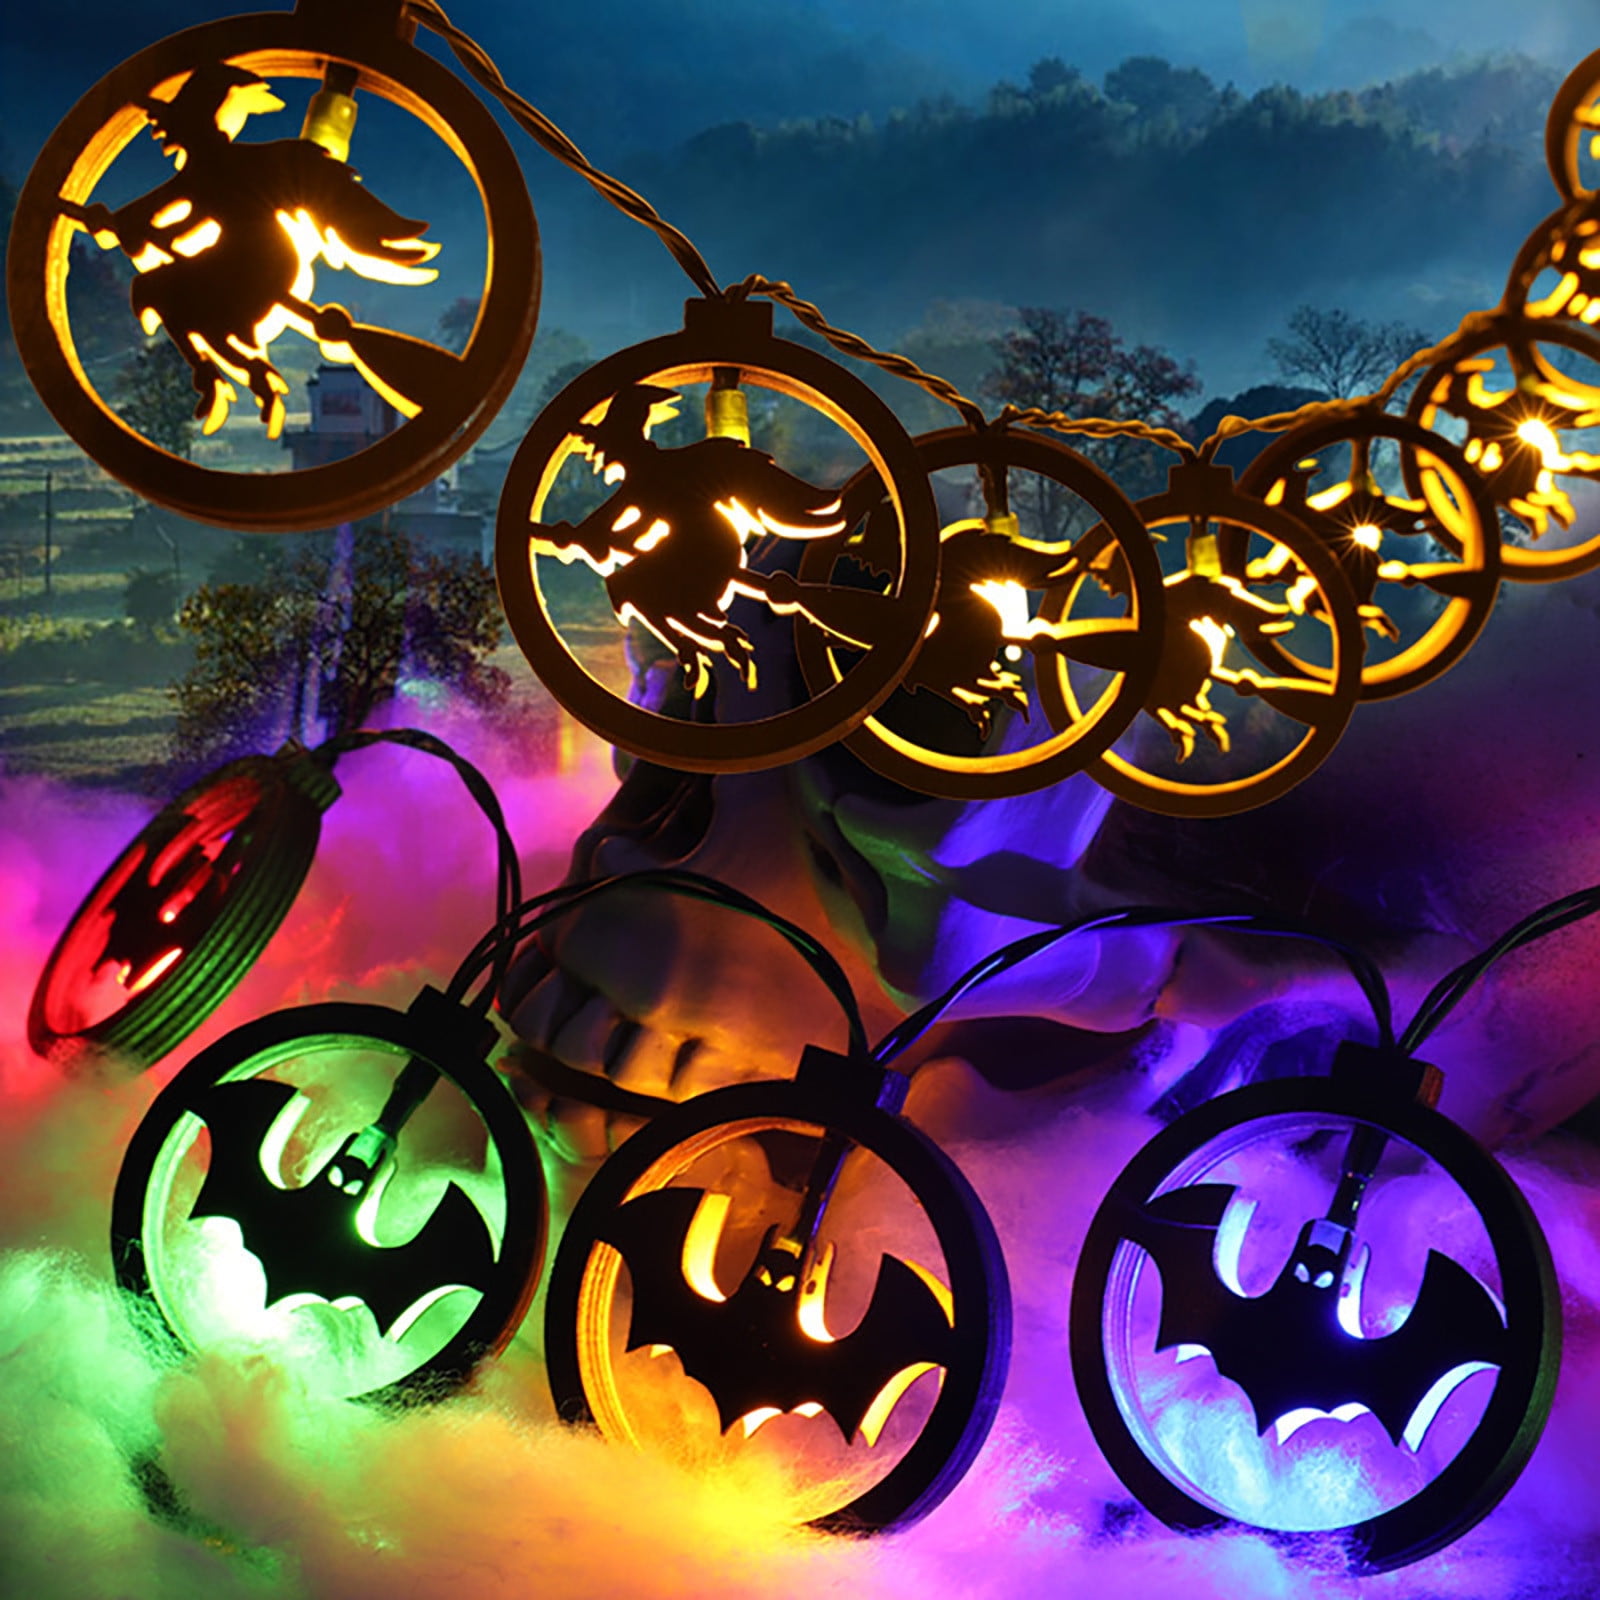 Snorda Halloween Decorations, 2022 New Version 10ft 20 LEDs Wooden ...